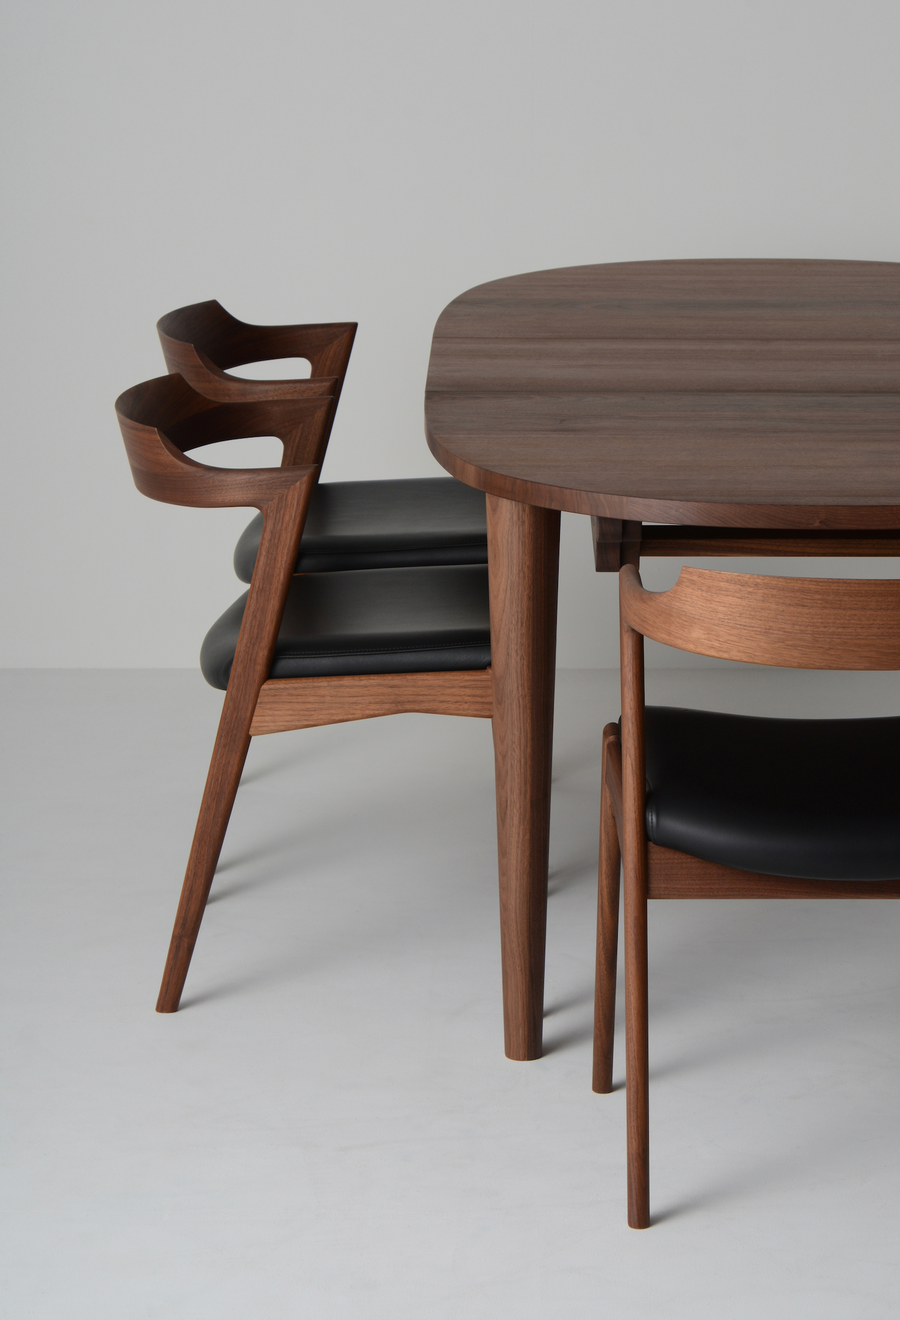 Geppo Seed Fabric Cushioned Dining Chair | Walnut Wood